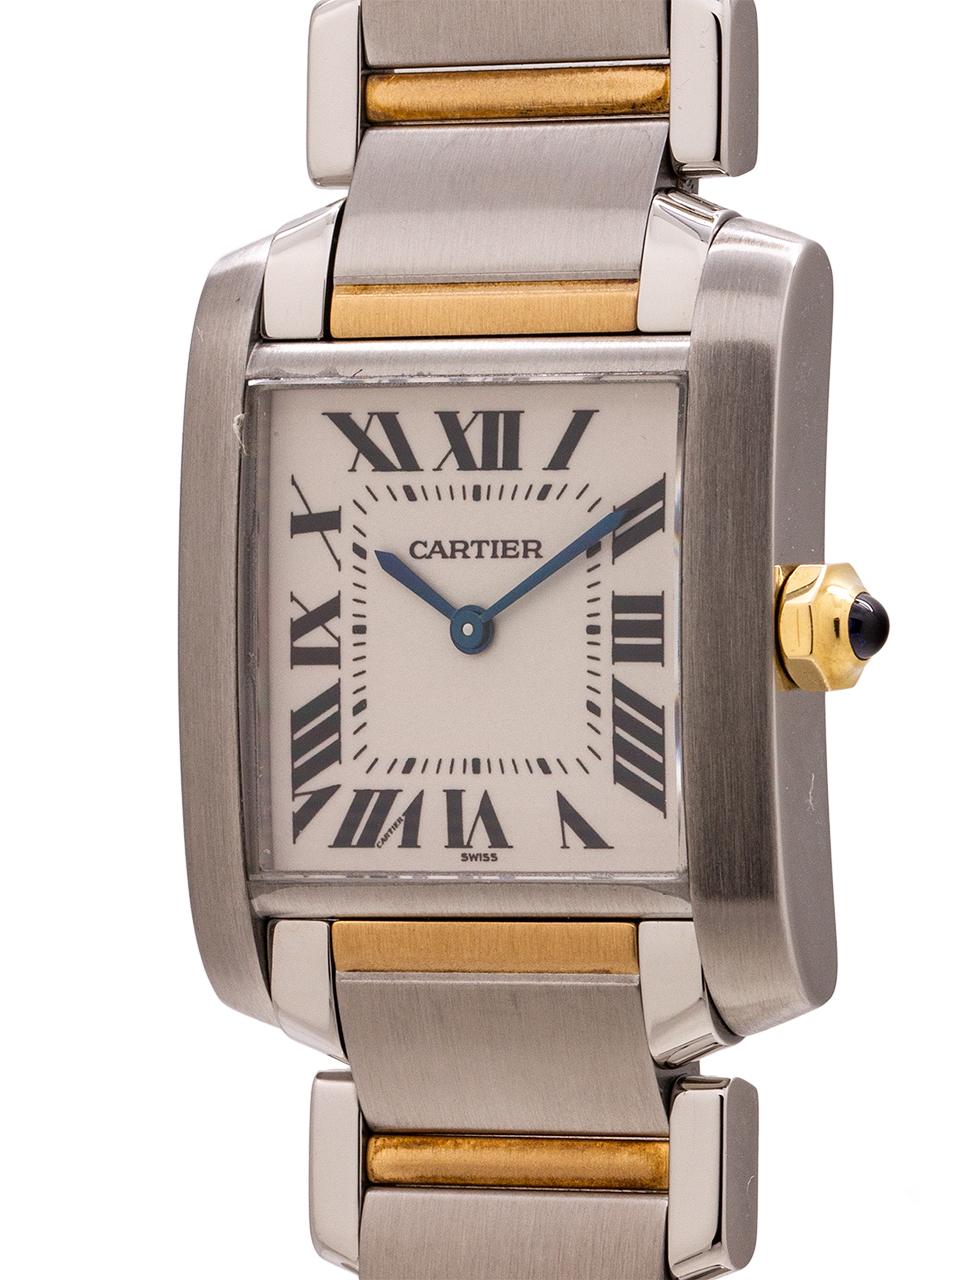 
Cartier stainless steel & 18K YG midsize Tank Francaise circa 2000. This is the midsize 26 X 35 mm case sporty size model for women. Featuring a classic white dial with Roman numerals and blue steel hands and sapphire cabachon crown. Battery